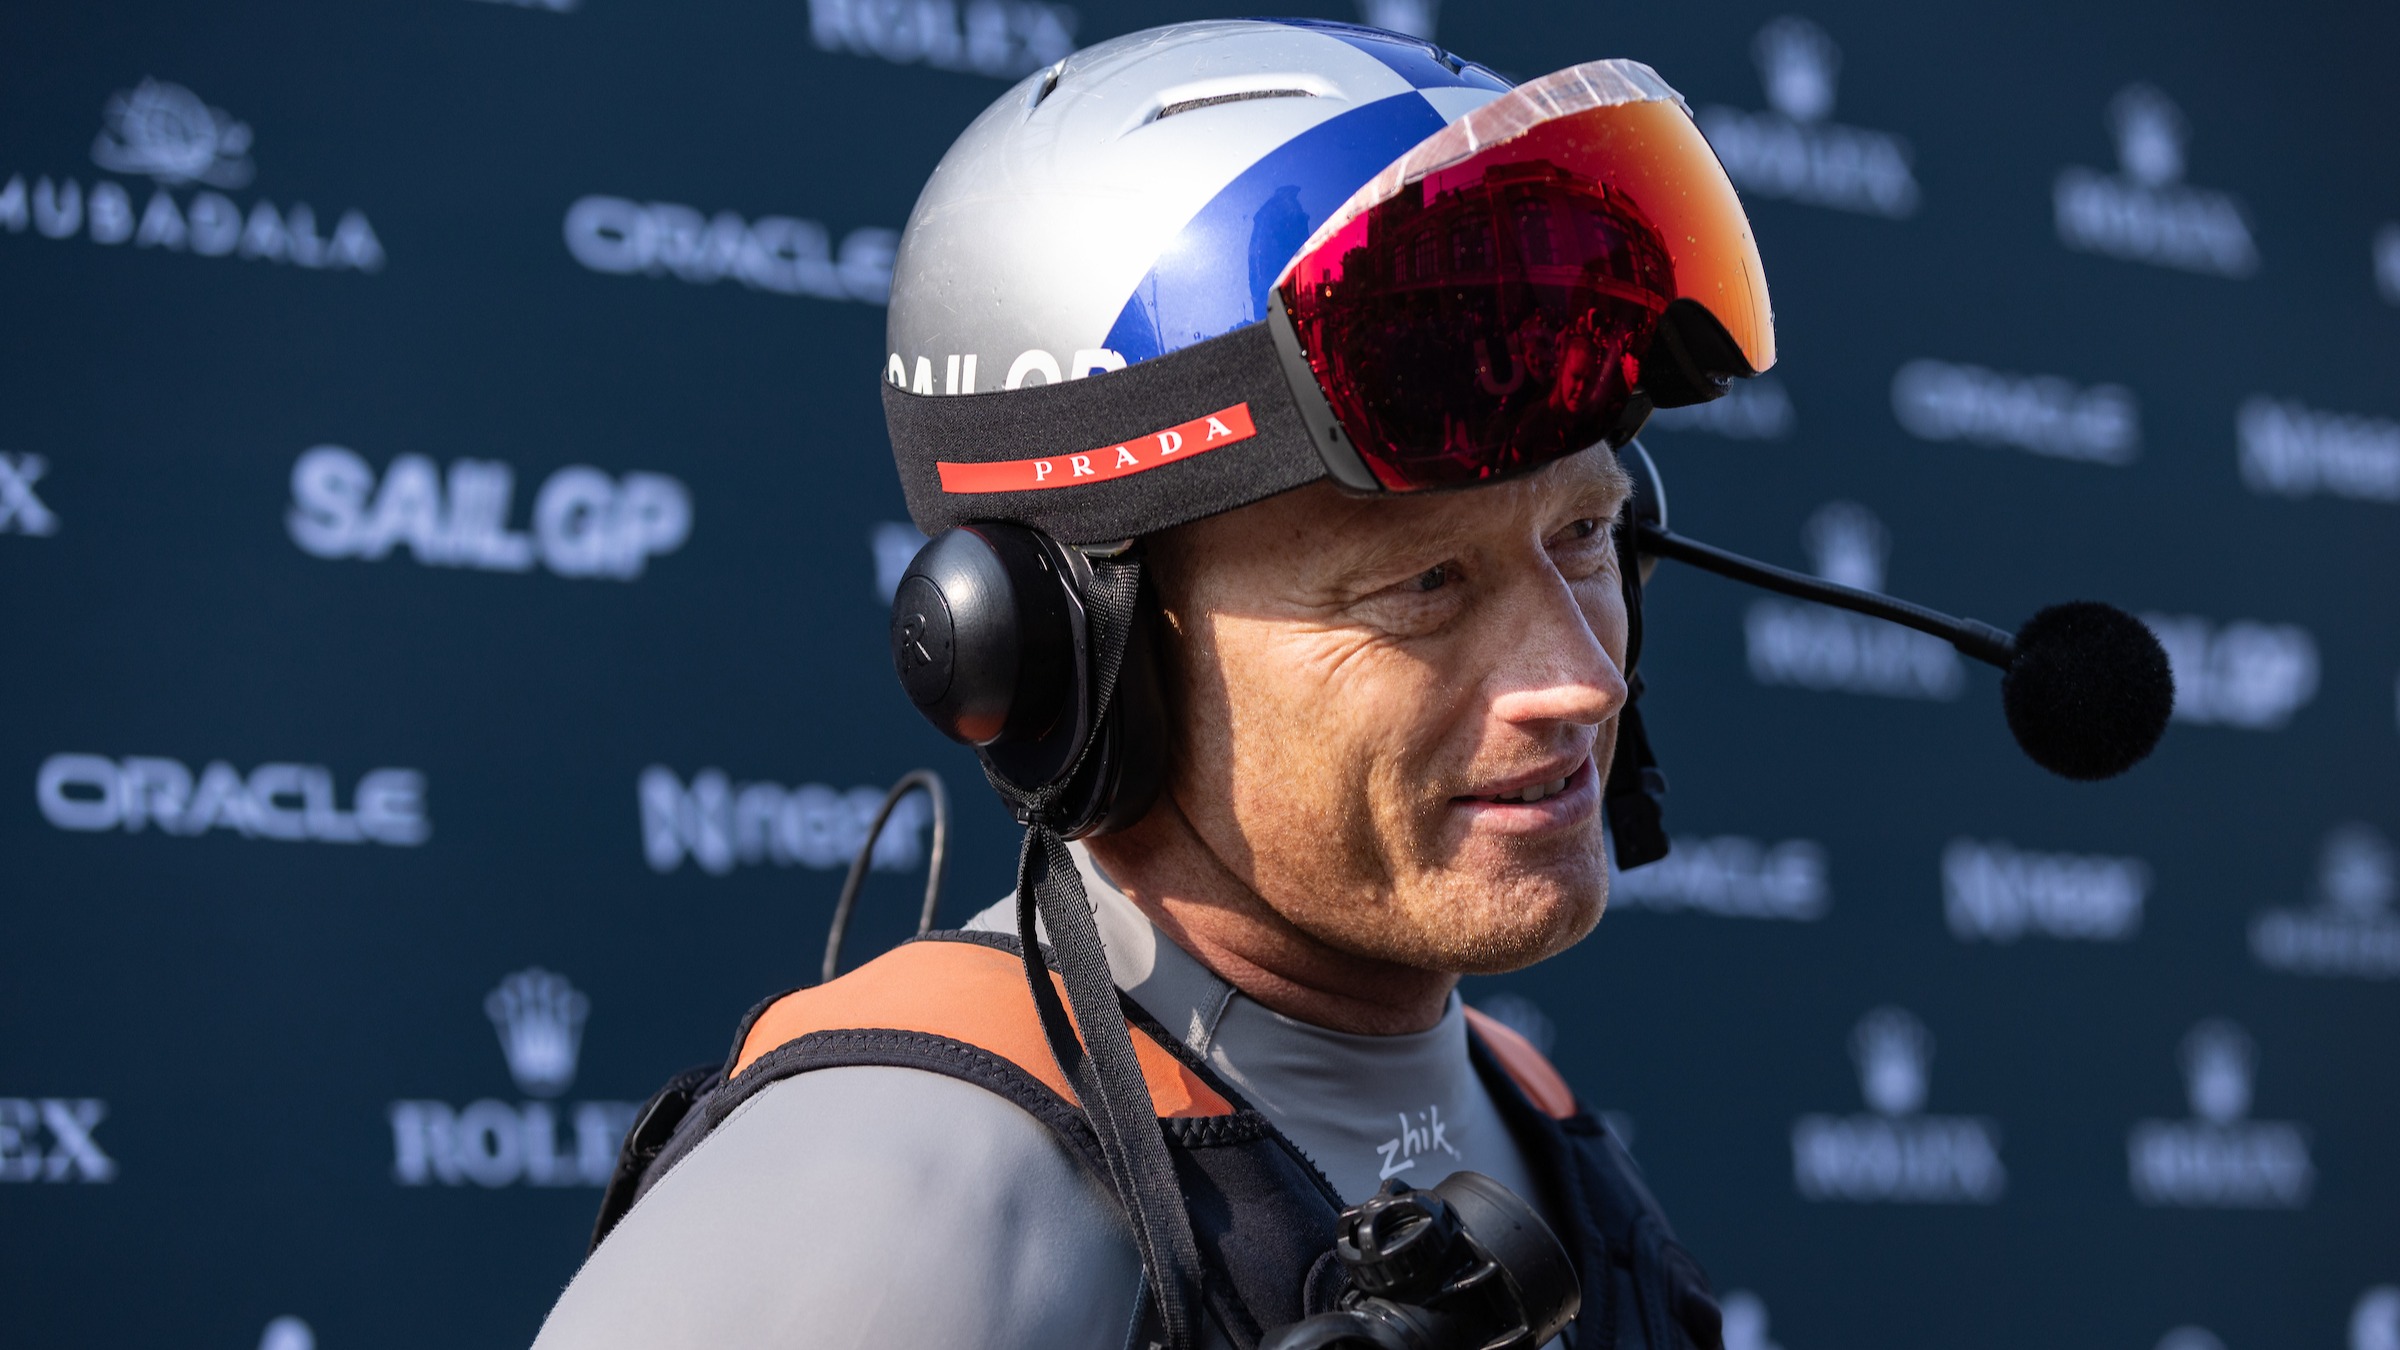 Season 4 // United States Sail Grand Prix Chicago // Jimmy Spithill in Mixed Zone